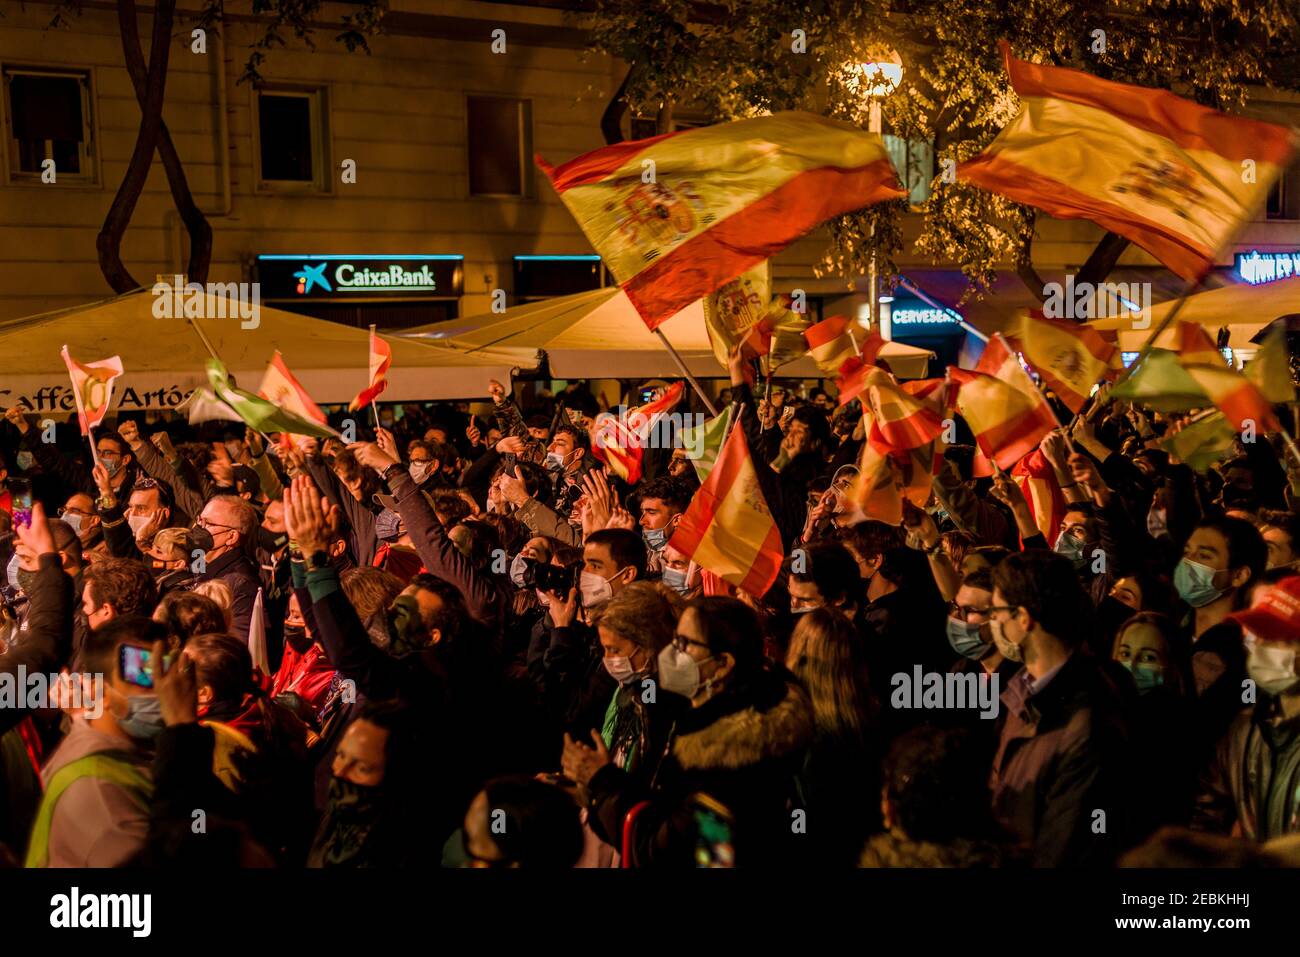 Barcelona, Spain. 12th Feb, 2021. Supporters of right-wing party VOX wearing protective face masks wave Spanish flags during the party's closing meeting of their Catalan election campaign amidst the ongoing COVID-19 pandemic Credit: Matthias Oesterle/Alamy Live News Stock Photo